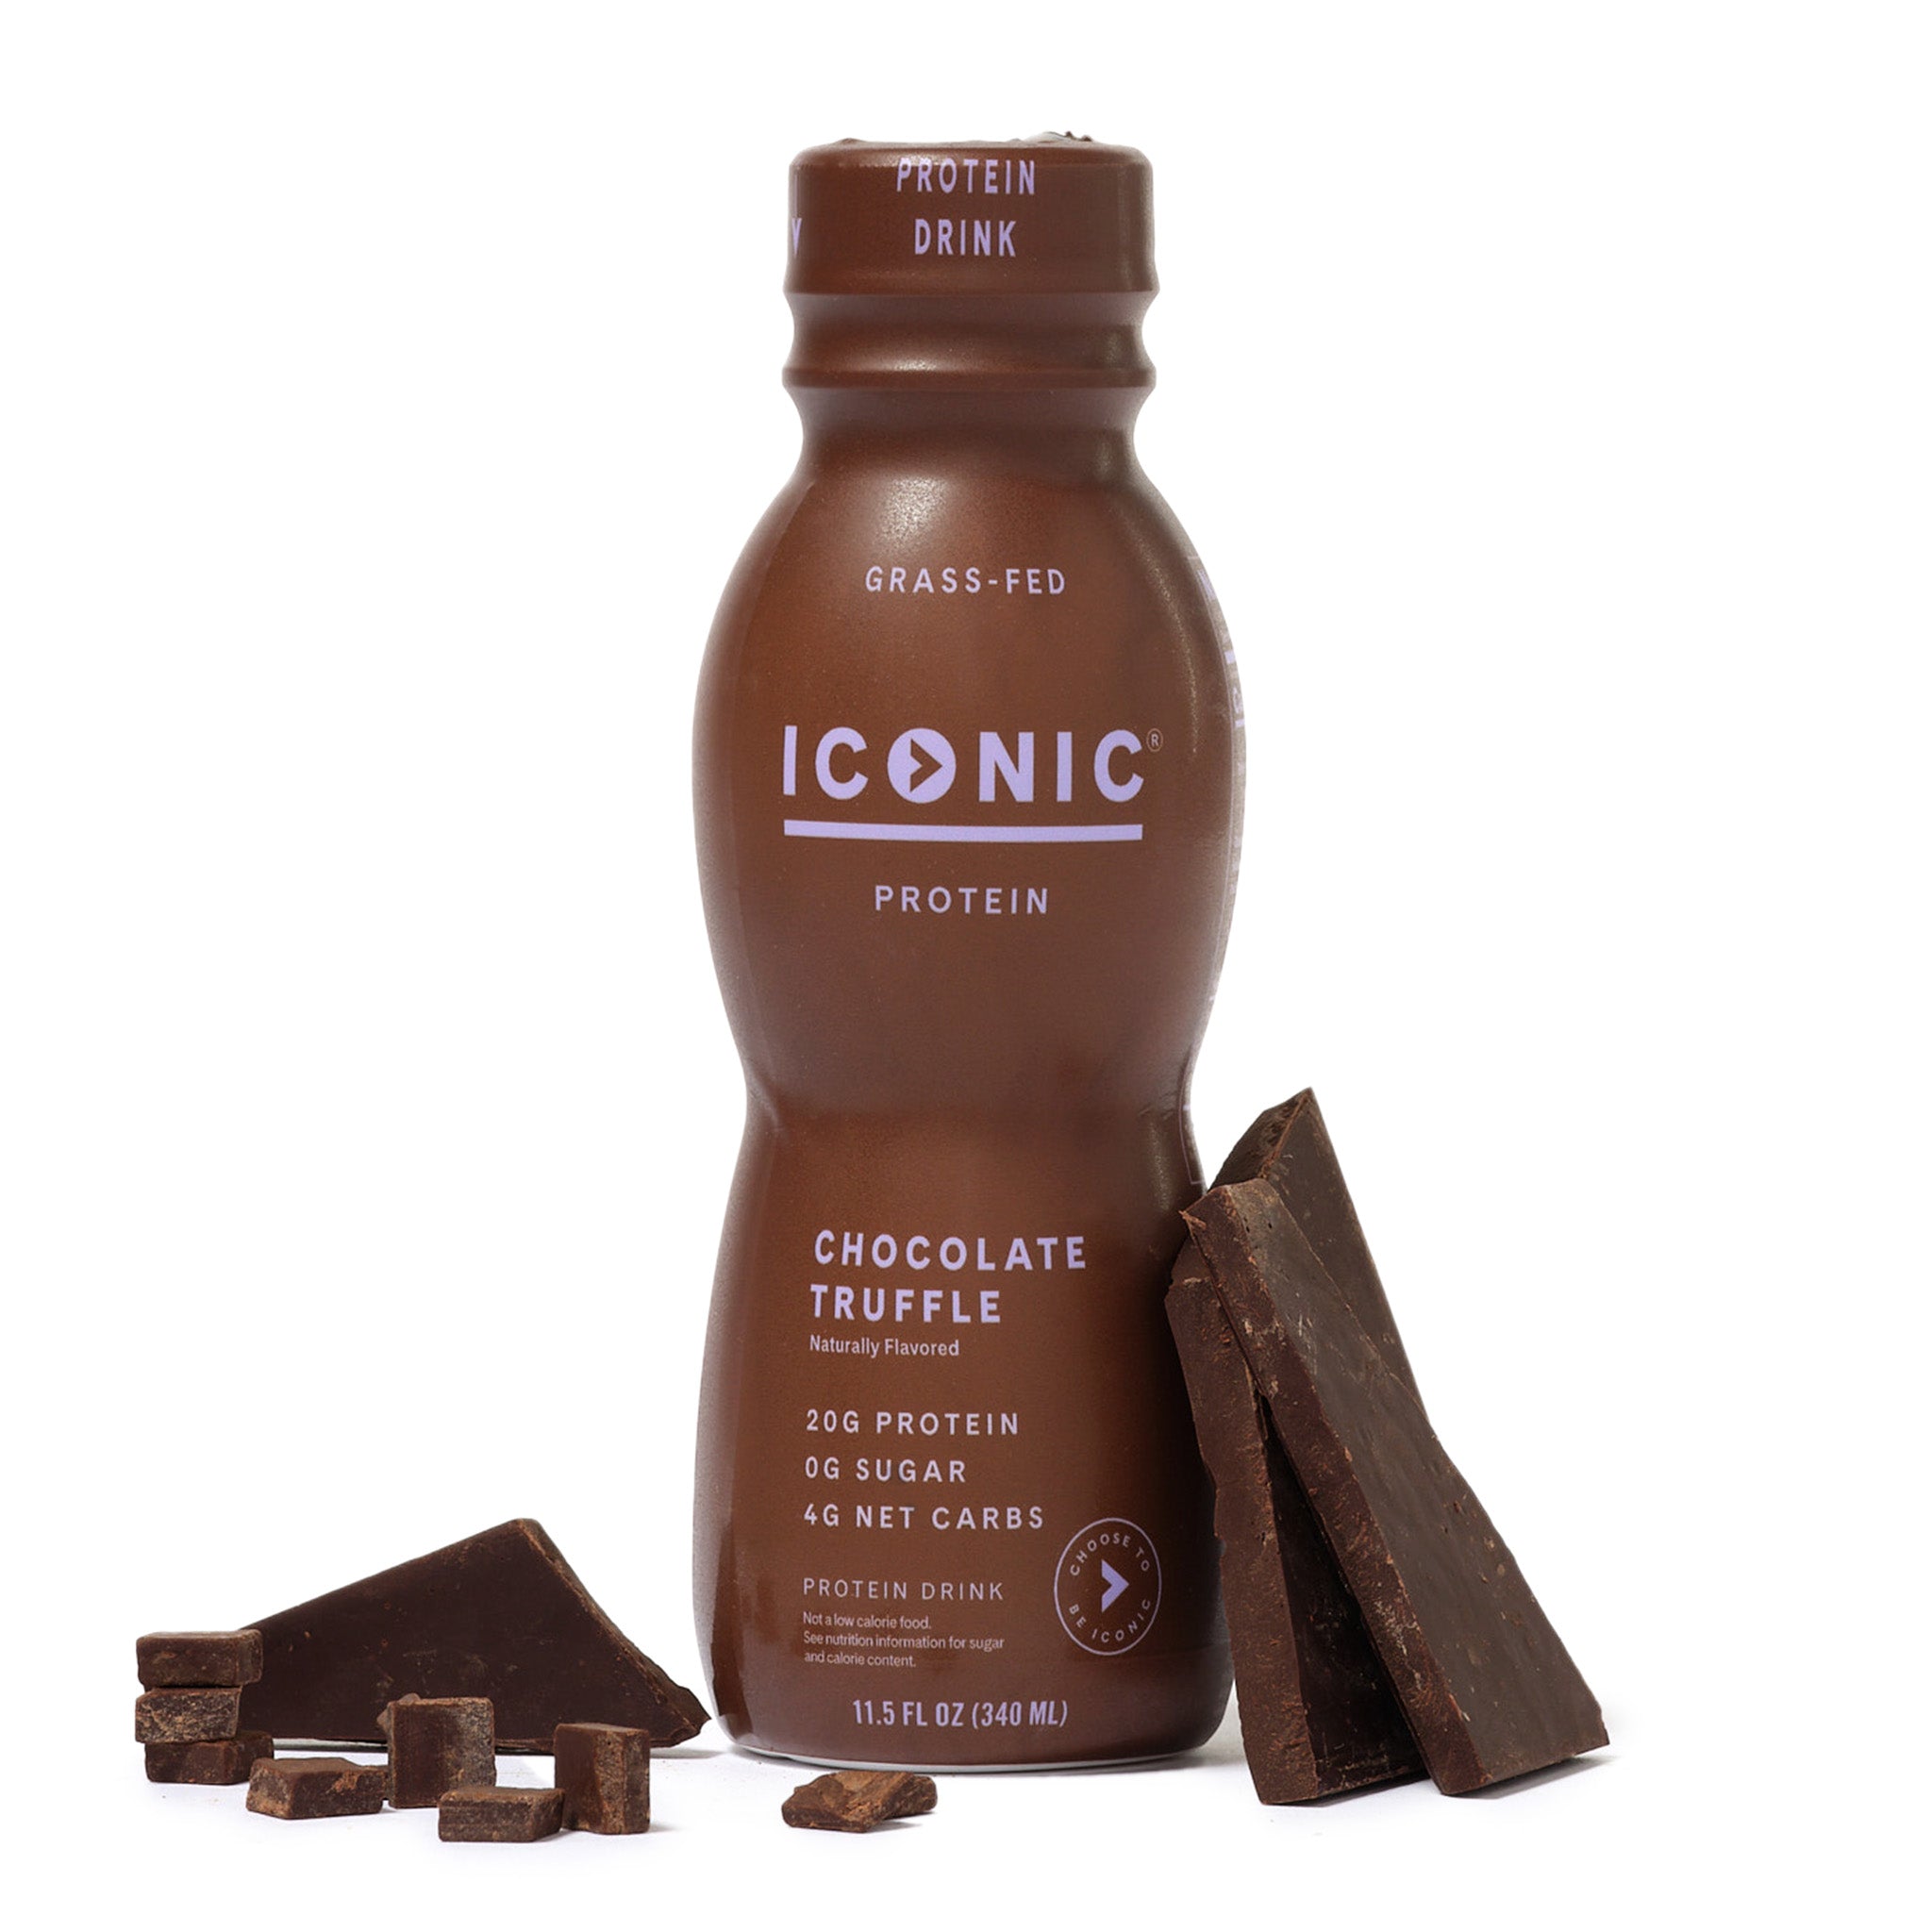 Iconic Protein Drinks, Cacao + Greens (12 Pack), Grass Fed Protein Shakes  with Organic Veggies & Unroasted Cacao, Low Carb Superfood Drink, Lactose  Free, Gluten Free, Soy Free